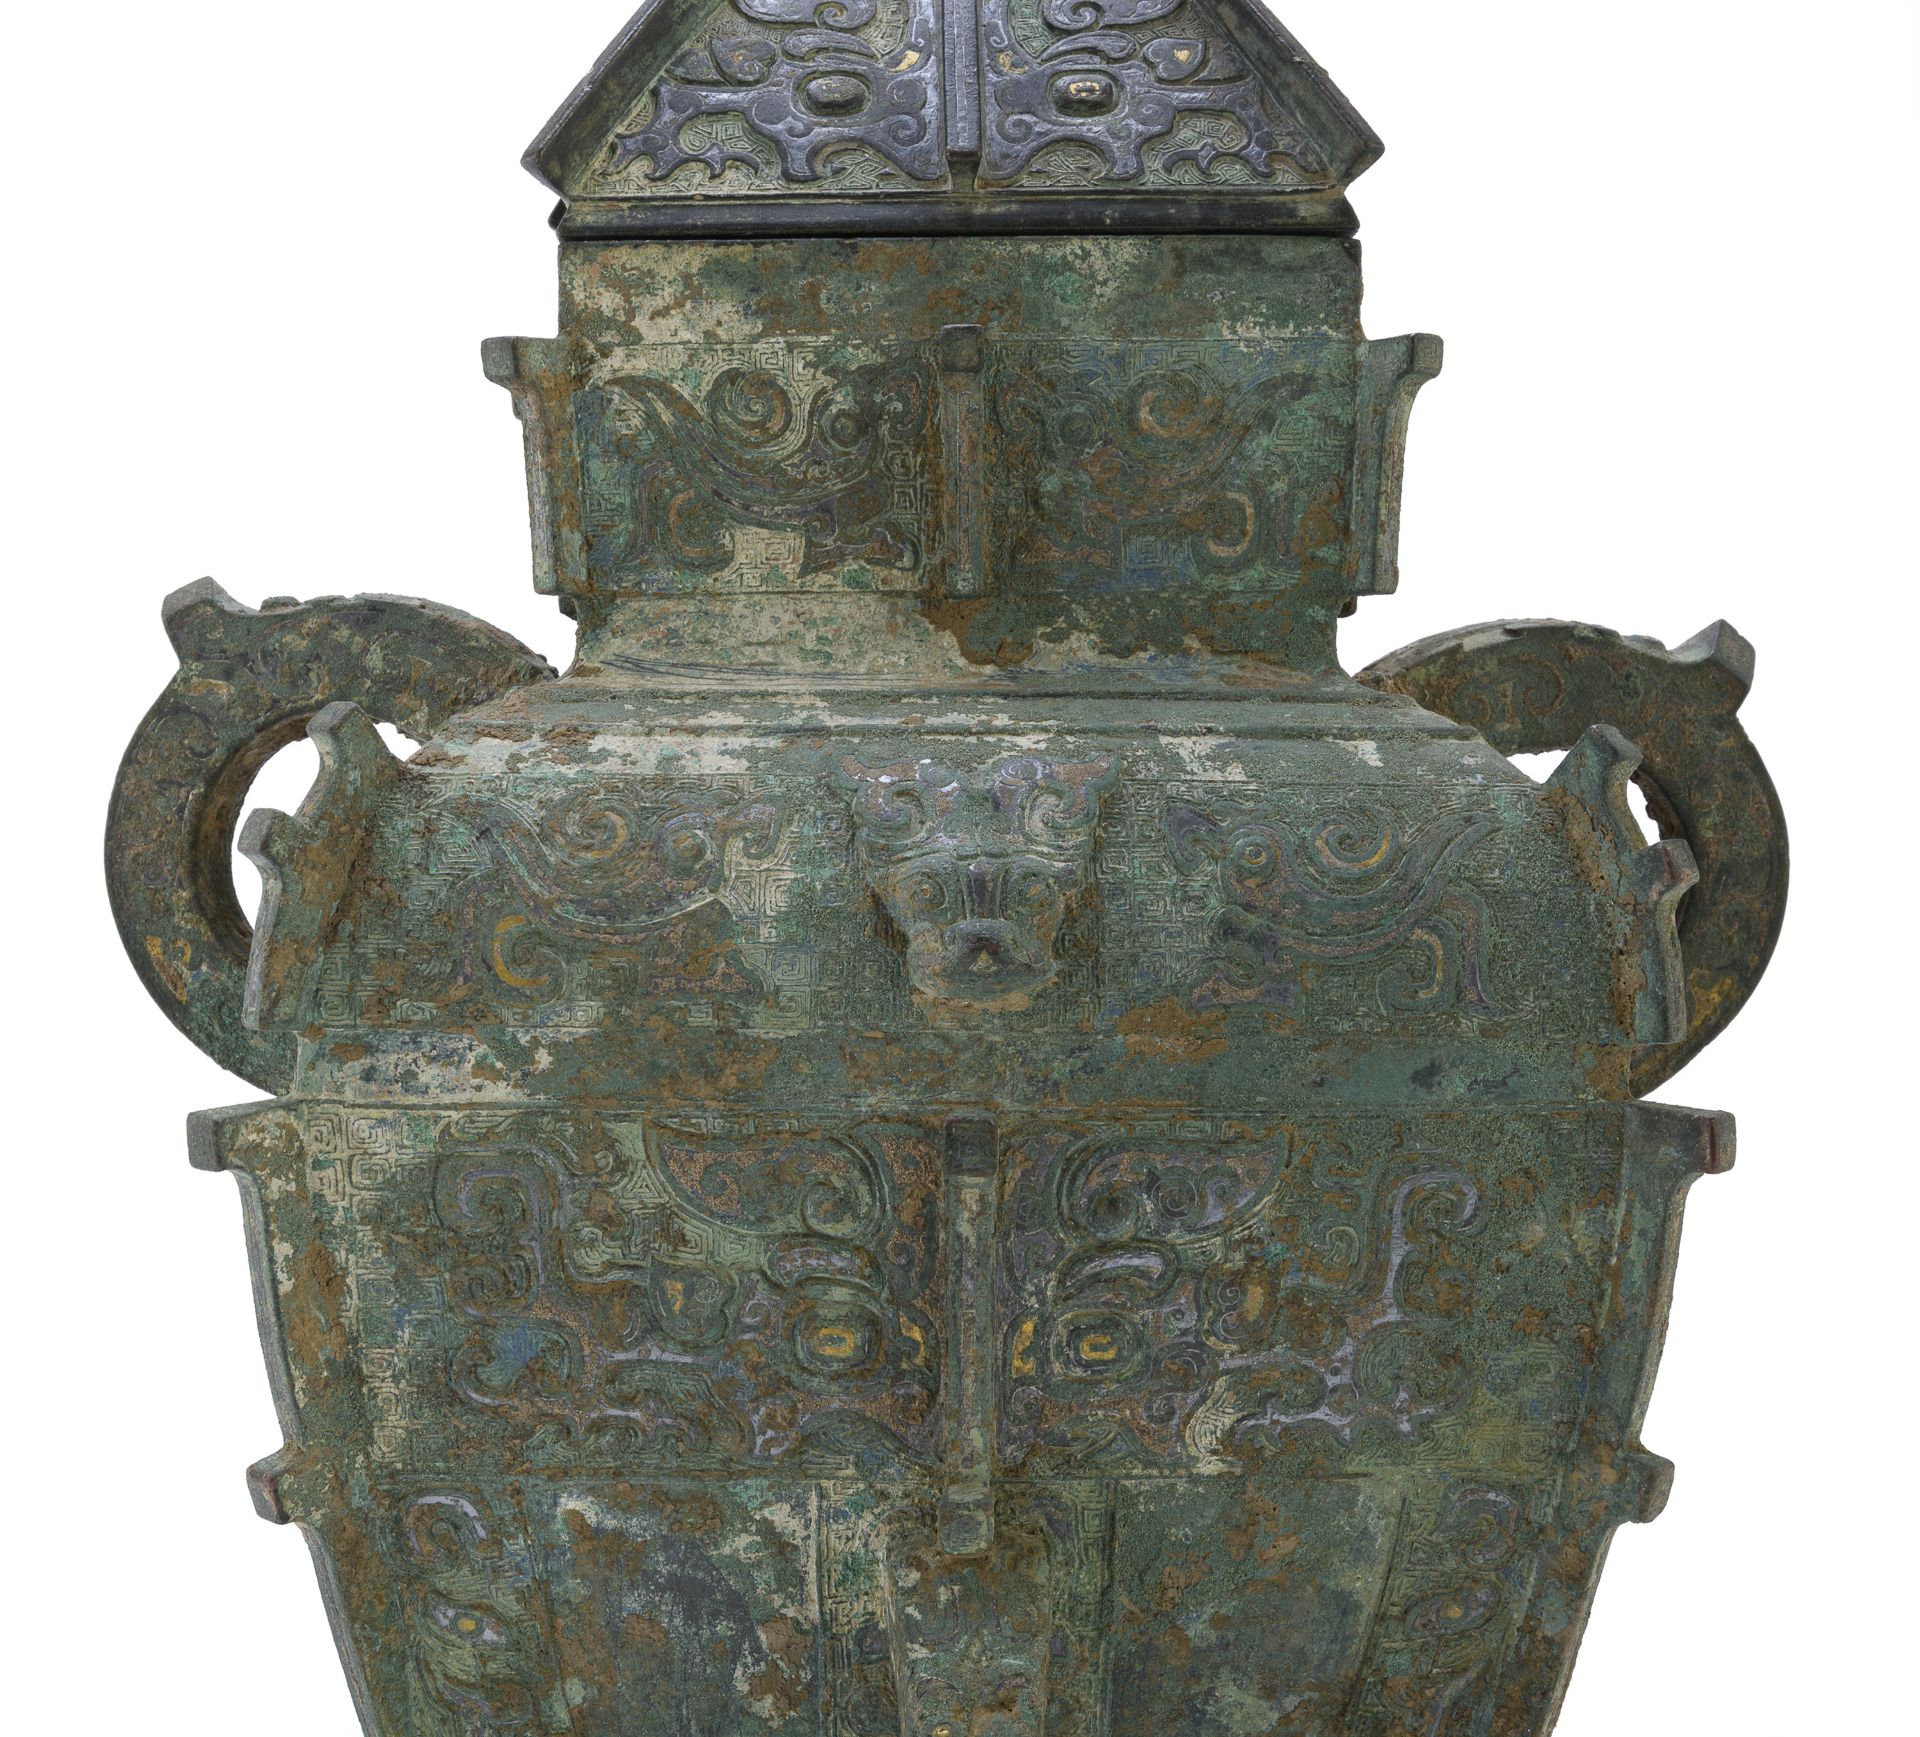 A RARE CHINESE BRONZE VASE 12TH - 13TH CENTURY. - Image 4 of 7